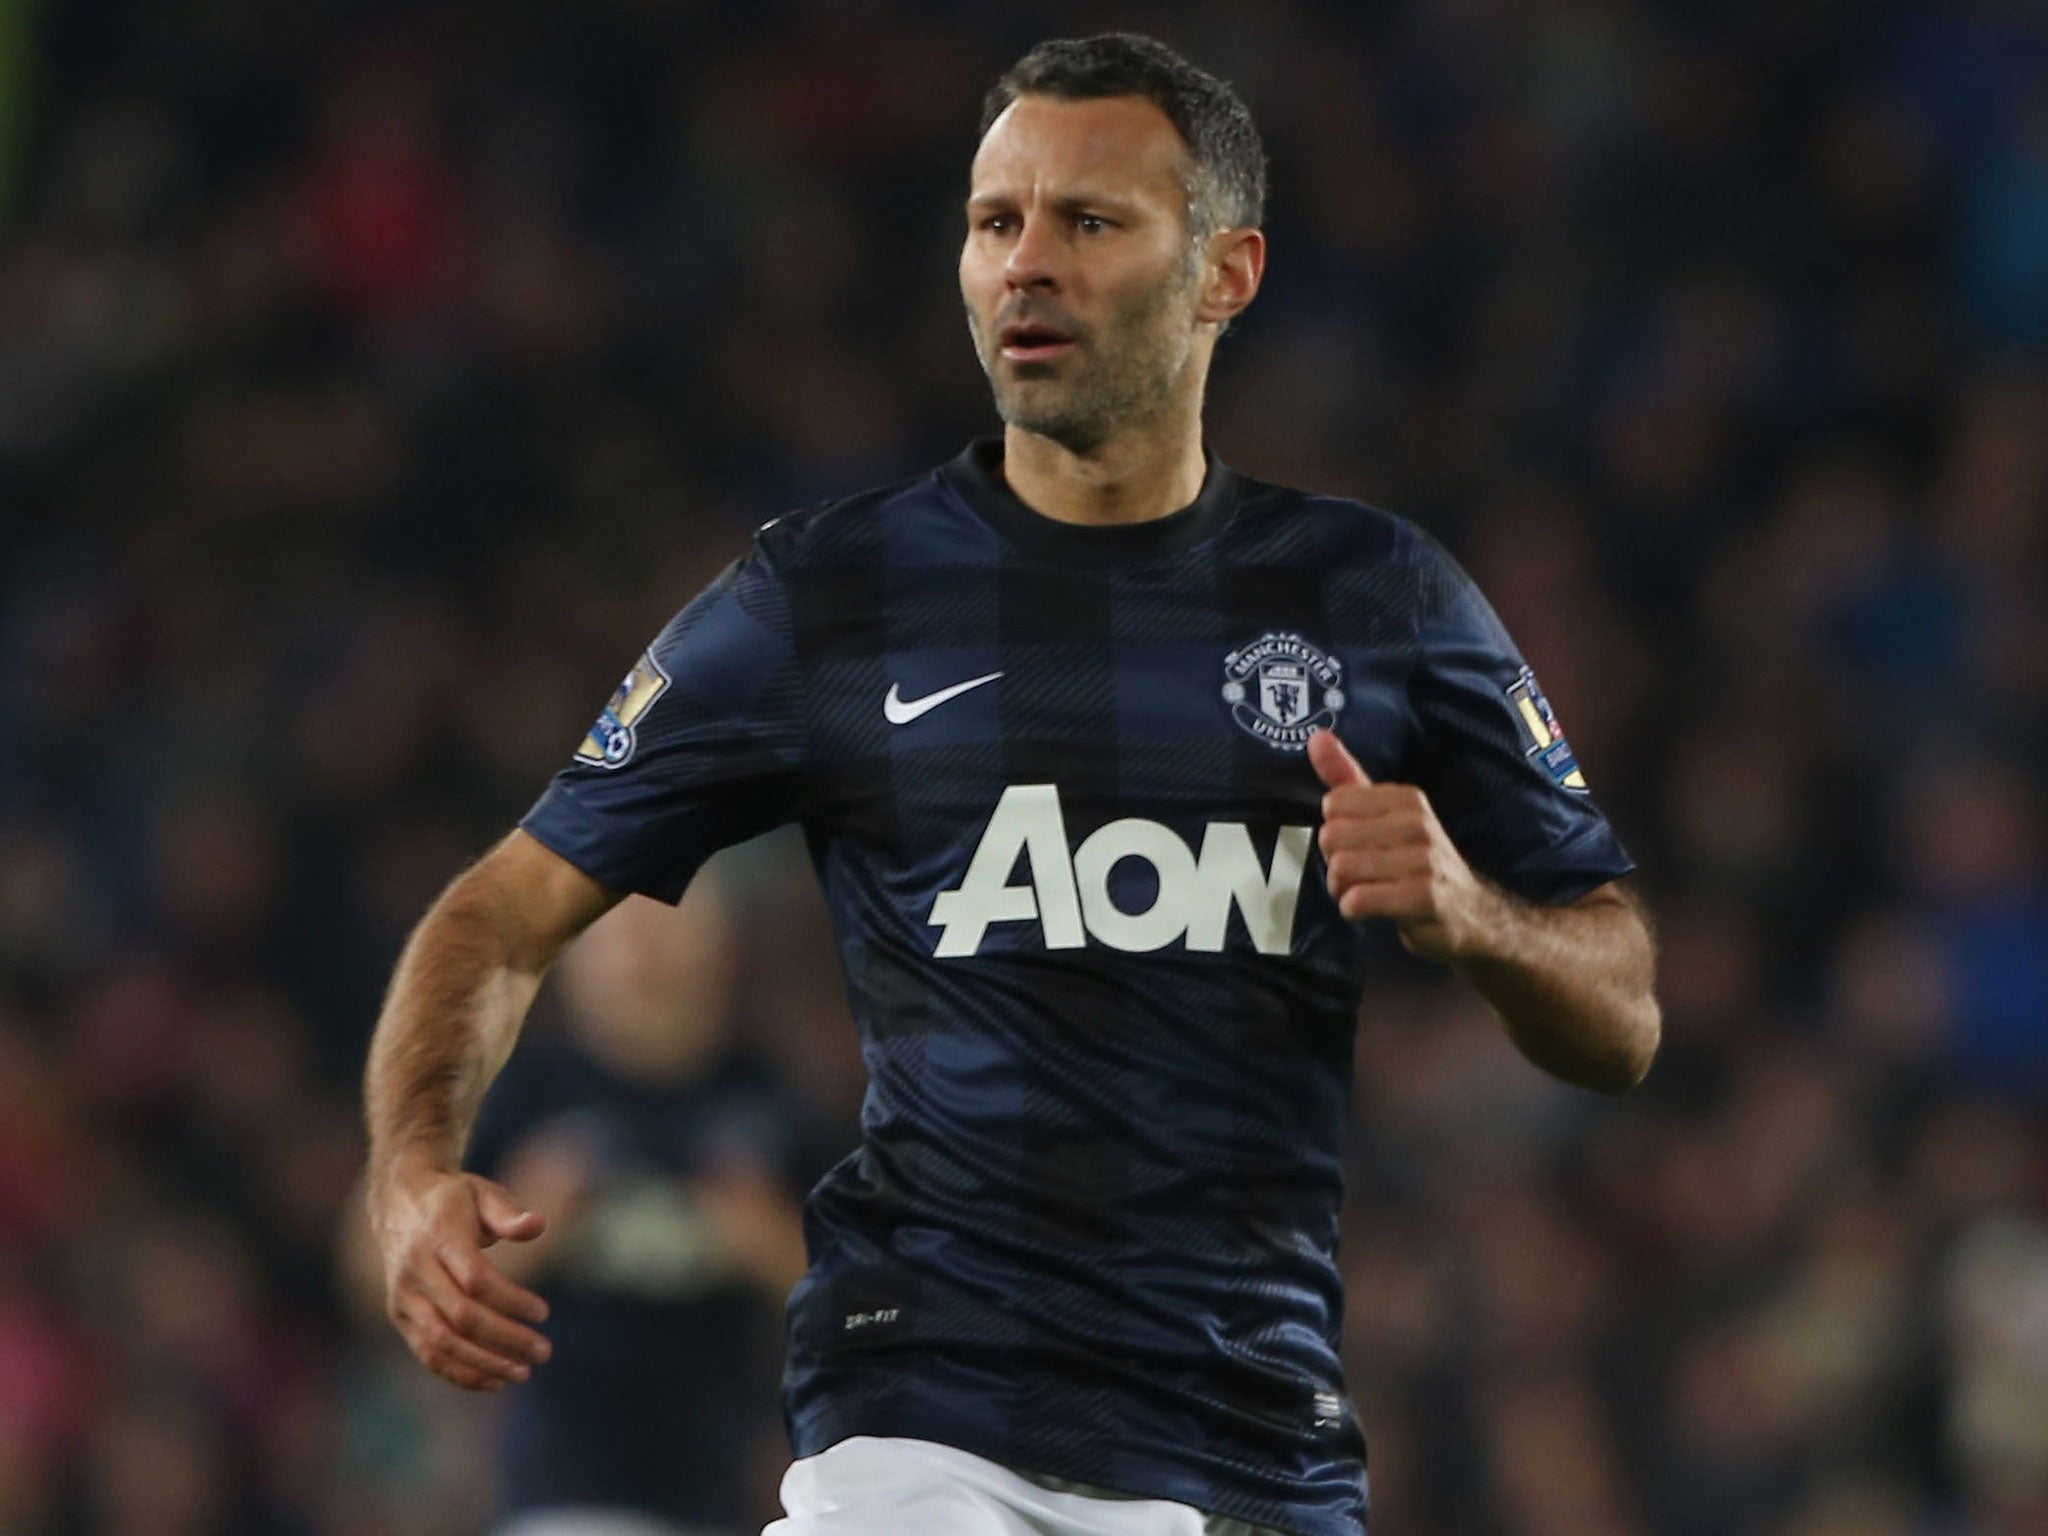 Ryan Giggs has been praised for his Manchester United career by former team-mate Gary Pallister